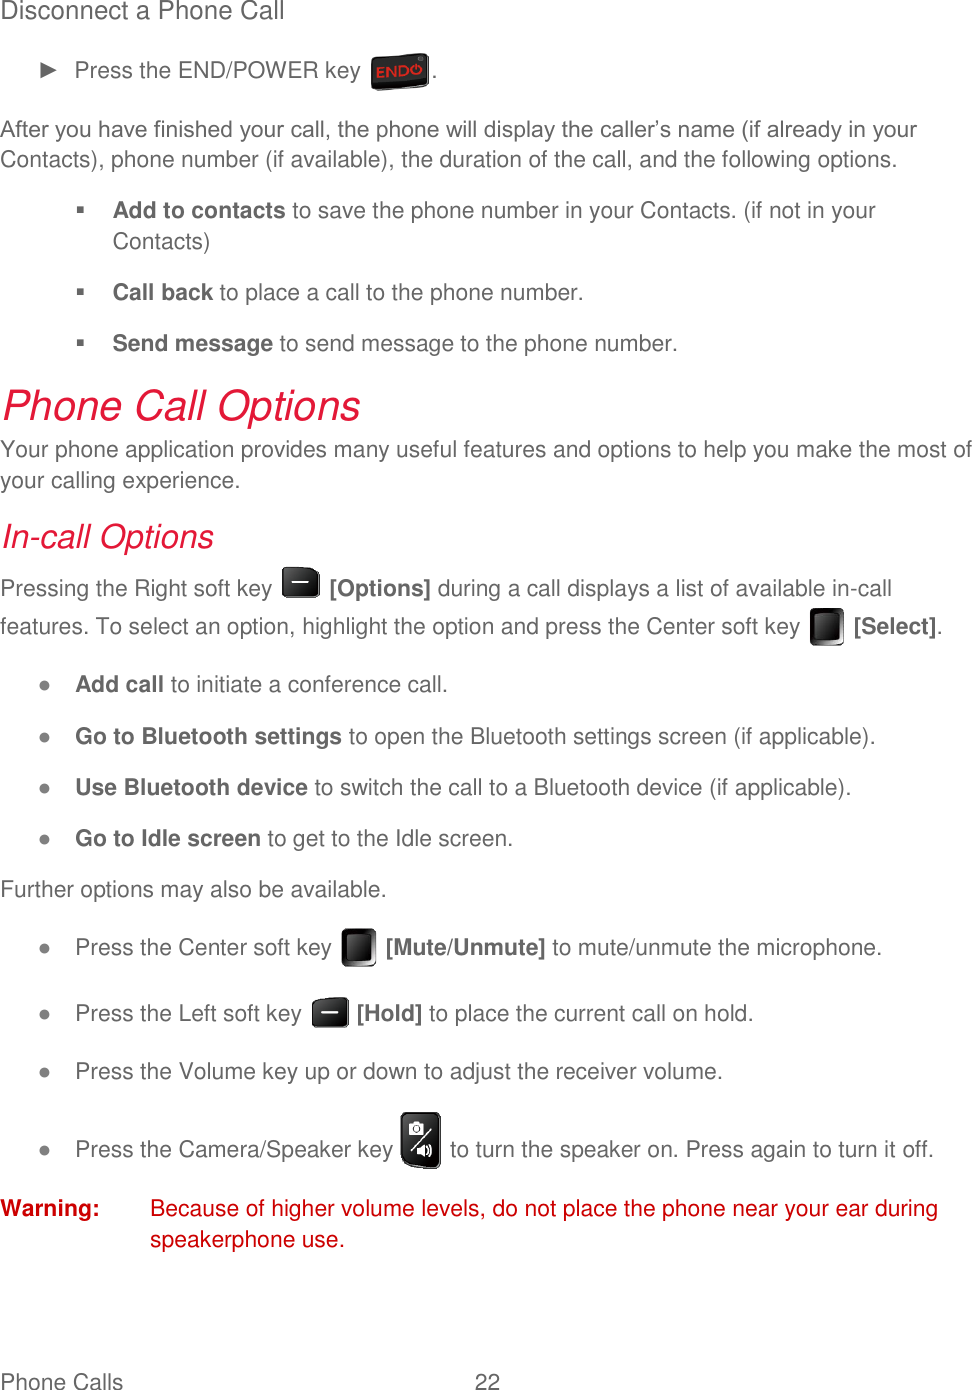 Phone Calls  22   Disconnect a Phone Call ►  Press the END/POWER key  . After you have finished your call, the phone will display the caller’s name (if already in your Contacts), phone number (if available), the duration of the call, and the following options.  Add to contacts to save the phone number in your Contacts. (if not in your Contacts)  Call back to place a call to the phone number.  Send message to send message to the phone number. Phone Call Options Your phone application provides many useful features and options to help you make the most of your calling experience. In-call Options Pressing the Right soft key   [Options] during a call displays a list of available in-call features. To select an option, highlight the option and press the Center soft key   [Select]. ● Add call to initiate a conference call. ● Go to Bluetooth settings to open the Bluetooth settings screen (if applicable). ● Use Bluetooth device to switch the call to a Bluetooth device (if applicable). ● Go to Idle screen to get to the Idle screen. Further options may also be available. ● Press the Center soft key   [Mute/Unmute] to mute/unmute the microphone. ● Press the Left soft key   [Hold] to place the current call on hold. ● Press the Volume key up or down to adjust the receiver volume. ● Press the Camera/Speaker key   to turn the speaker on. Press again to turn it off. Warning:  Because of higher volume levels, do not place the phone near your ear during speakerphone use. 